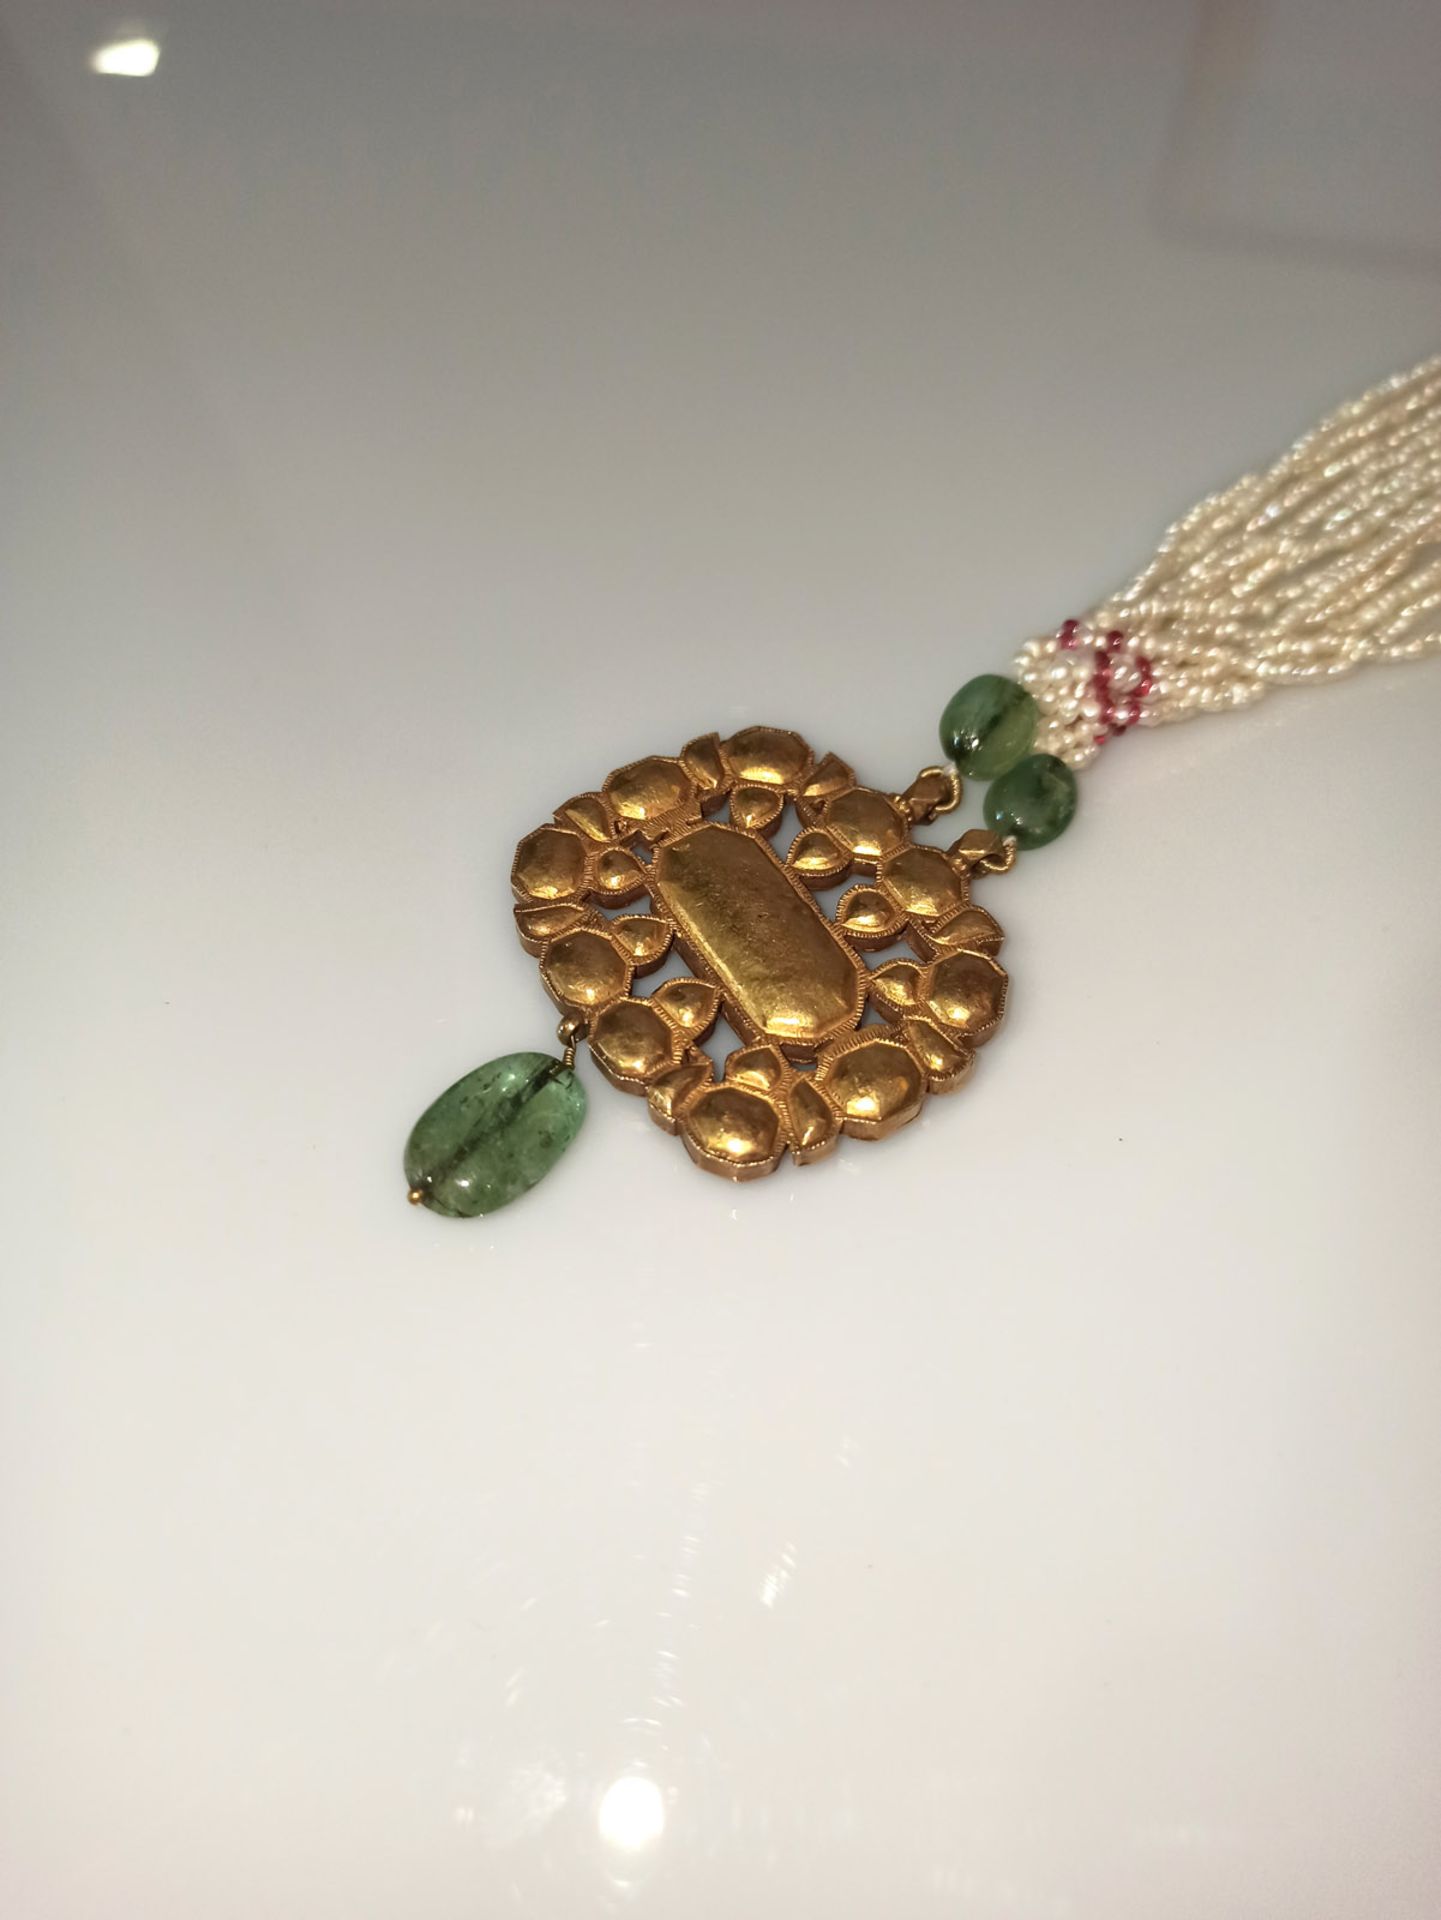 A PEARL NECKLACE WITH INLAID GOLD PENDANT IN MUGHAL STYLE - Image 4 of 5